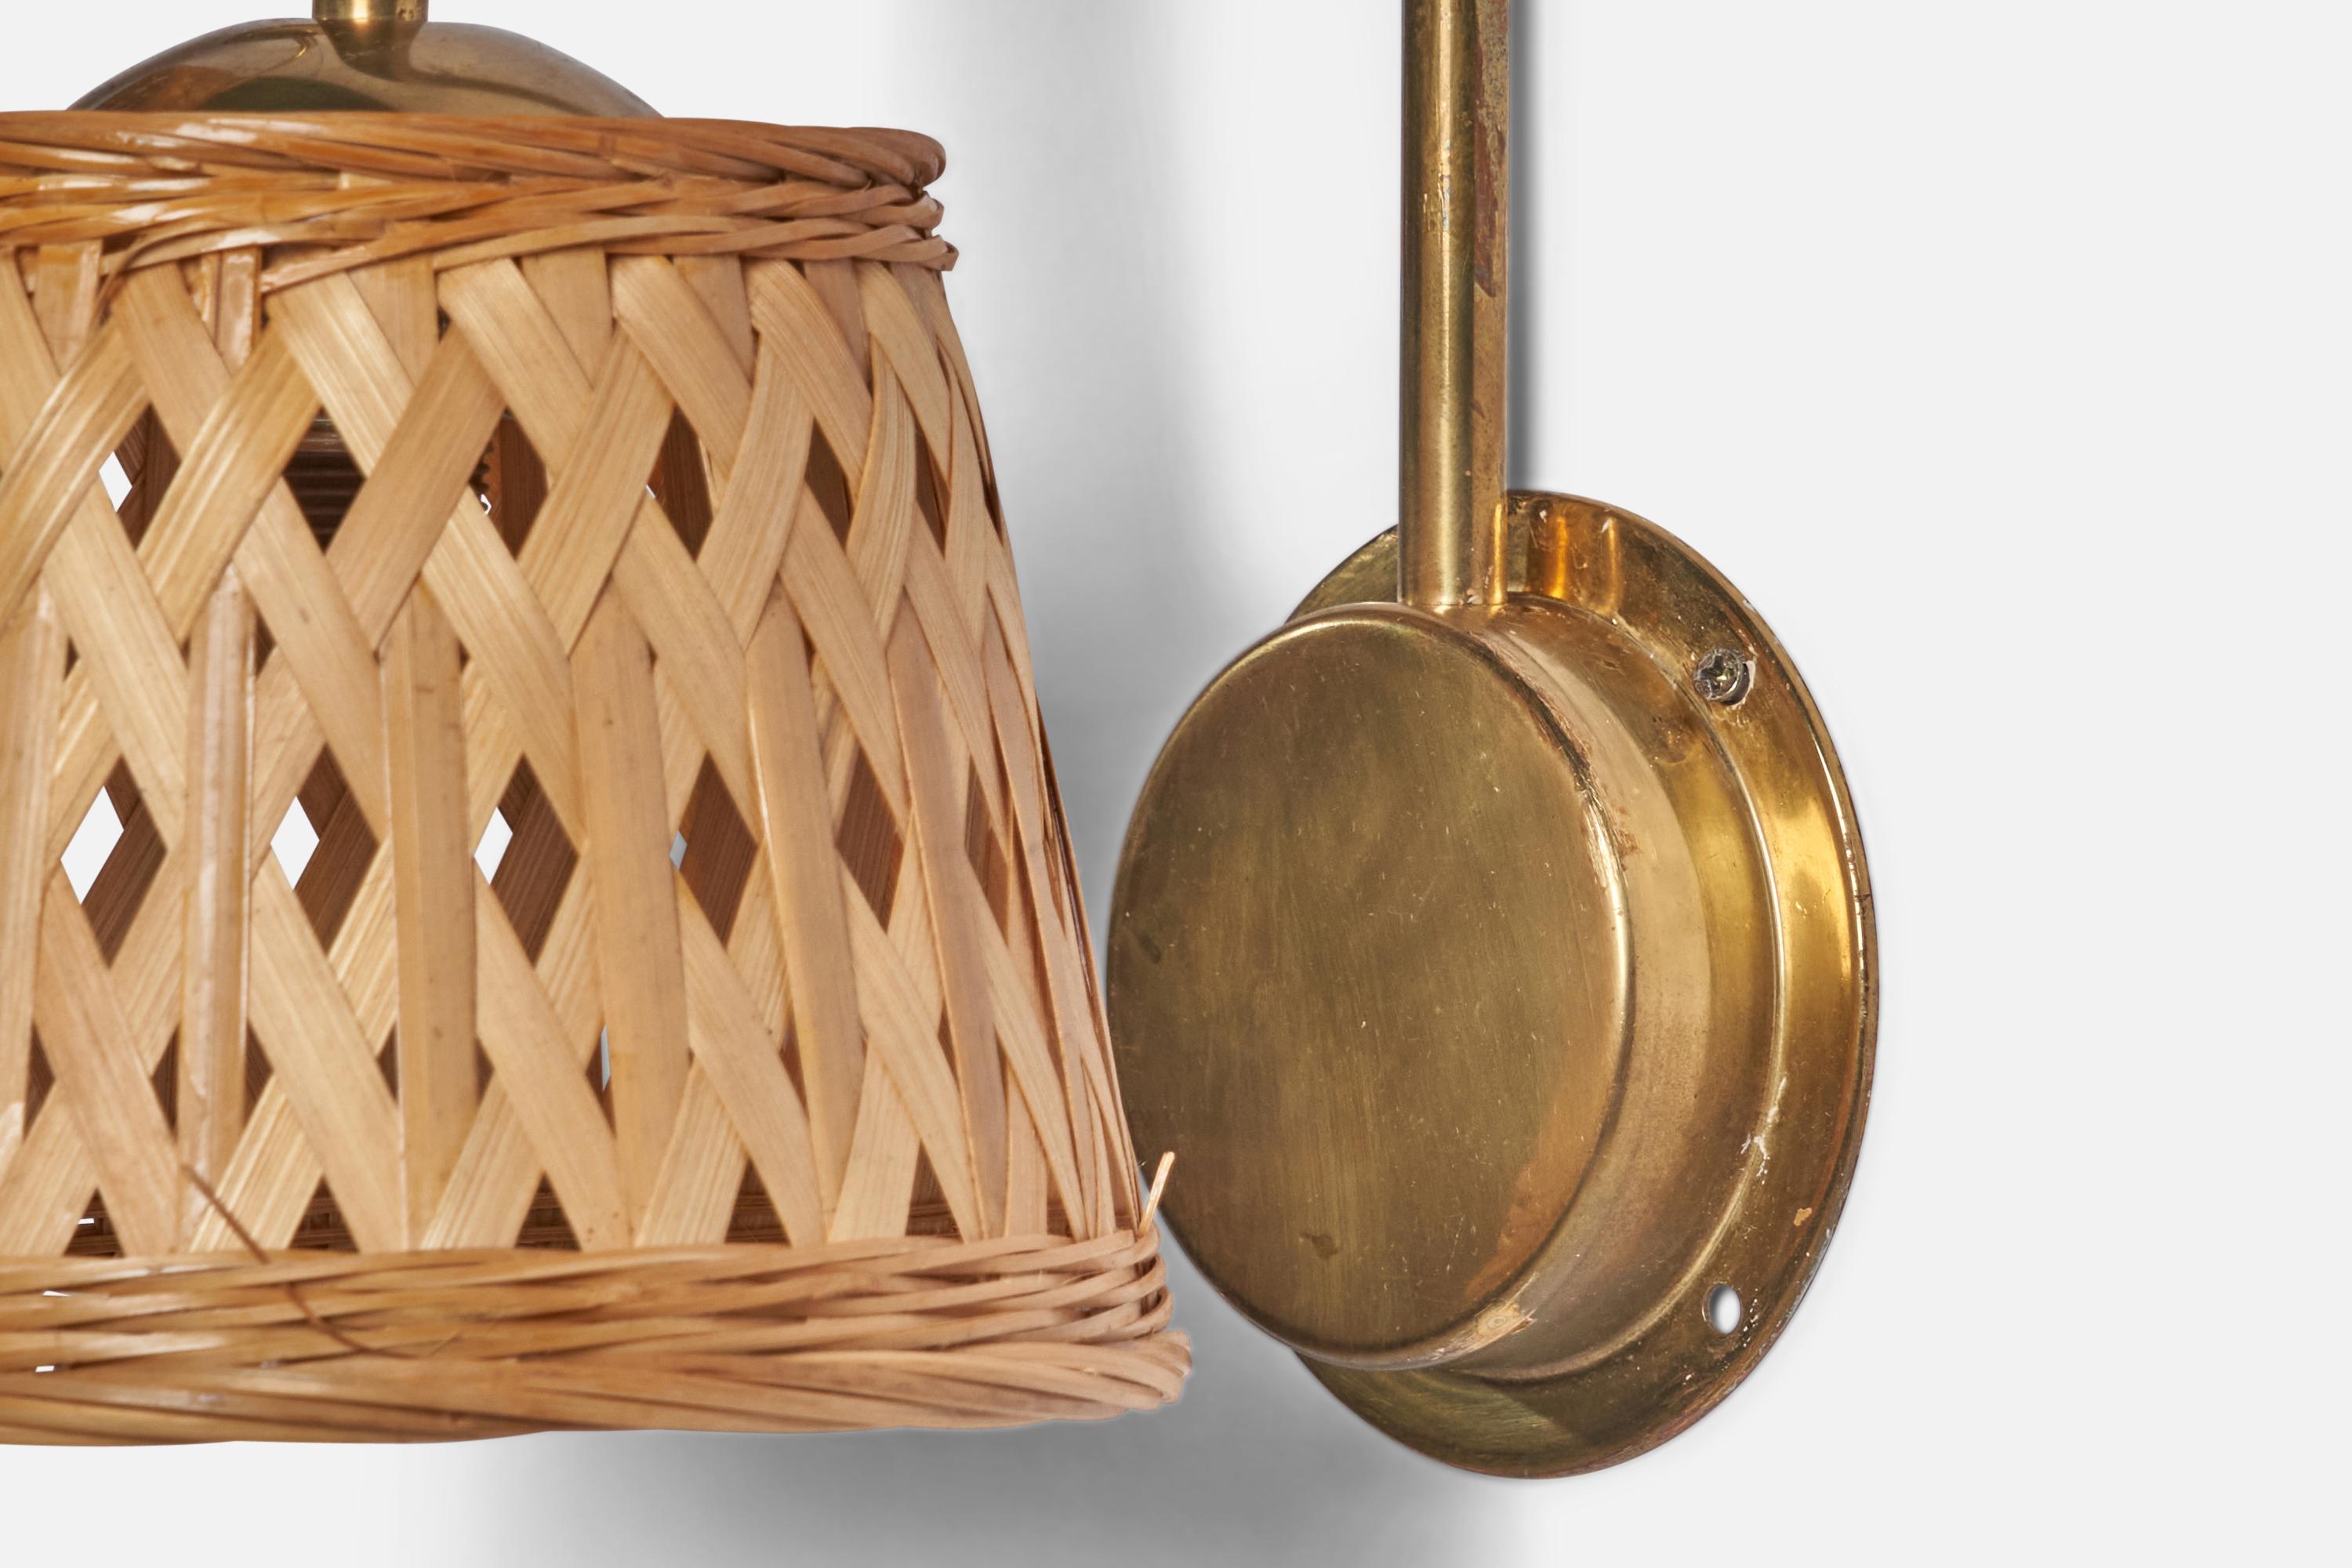 A pair of brass and rattan wall lights designed and produced in Sweden, c. 1970s.

Overall Dimensions (inches): 10” H x 7.25” W x 10” D
Back Plate Dimensions (inches): 4.25” Diameter
Bulb Specifications: E-14 Bulb
Number of Sockets: 1
All lighting